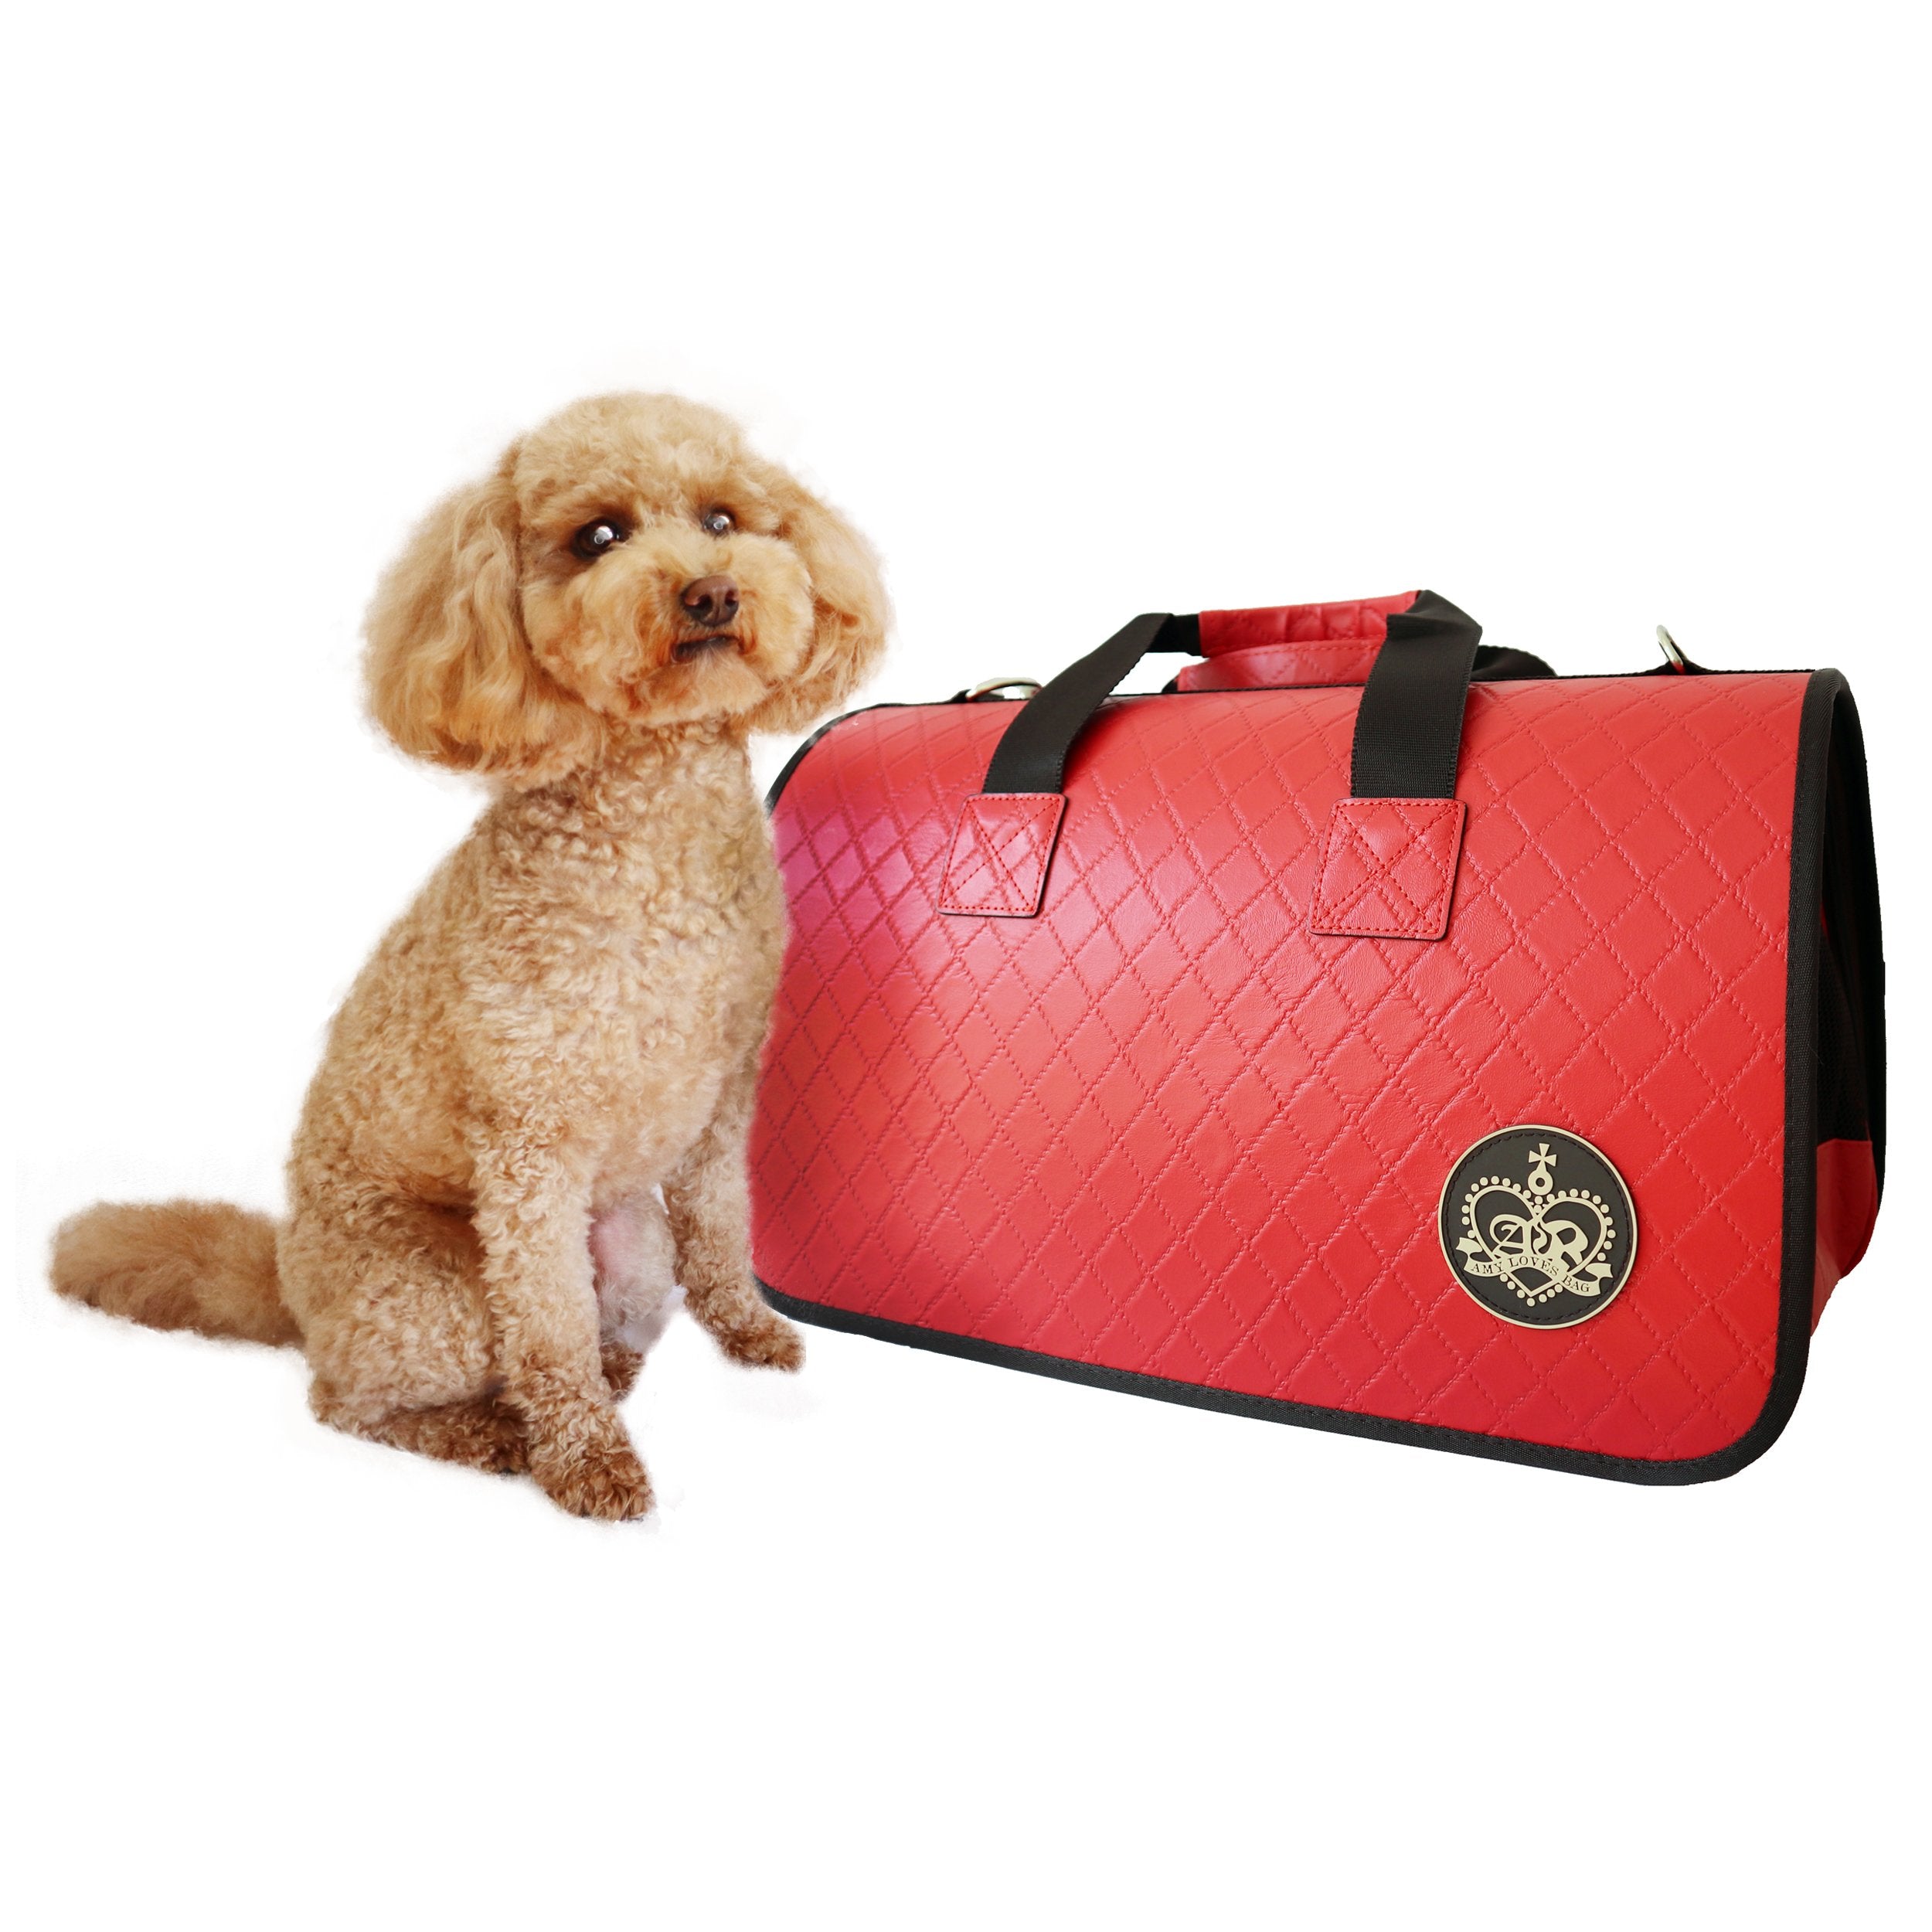 Beautiful Leather Case Carrier for Small Dogs and Cats with nylon stitched leather handles and strap Red Amy Loves Bags Poodle Model 